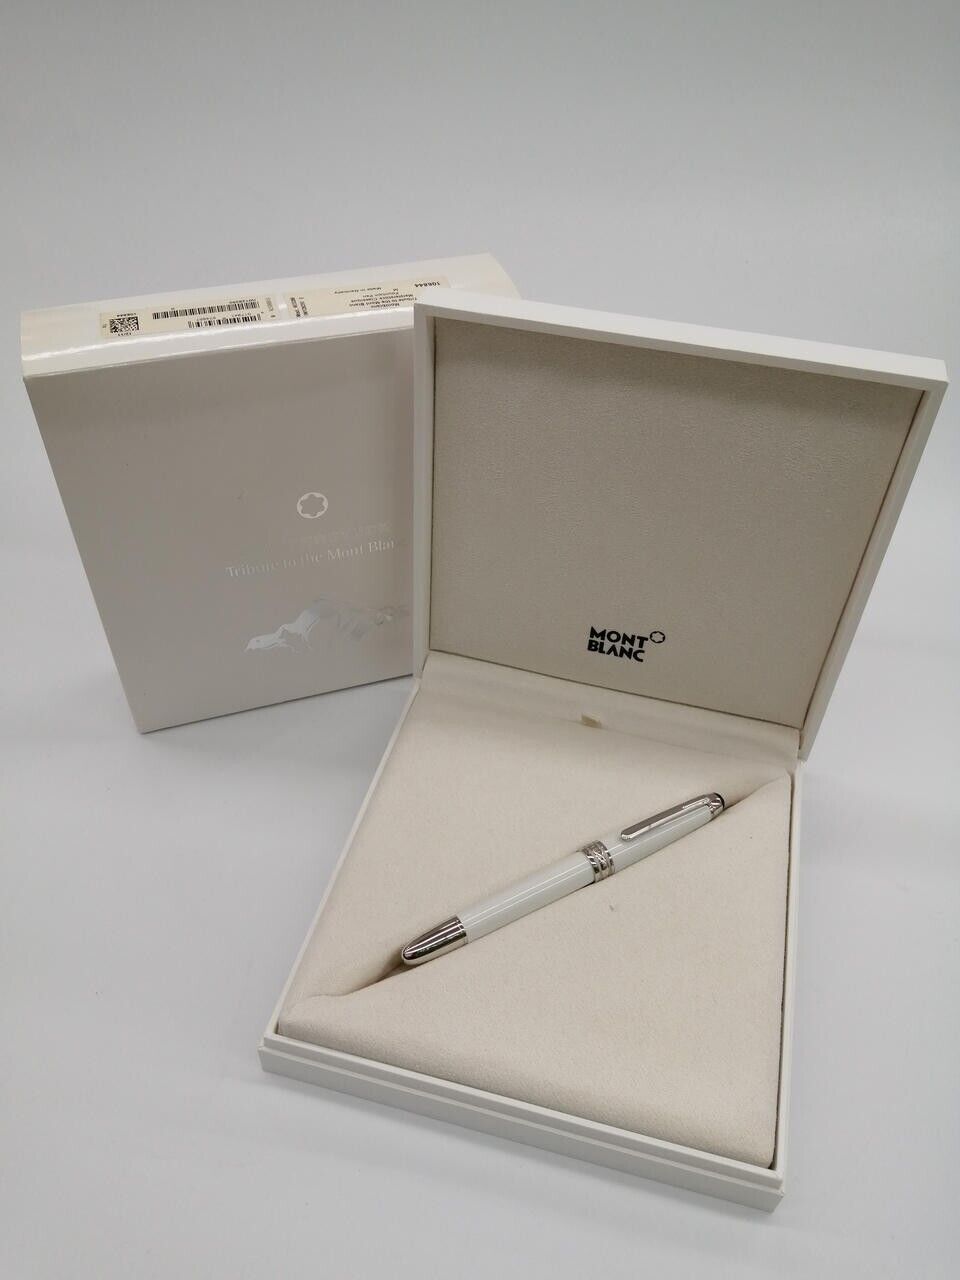 Montblanc Tribute to the Montblanc Nib M Meisterstuck fountain pen with Box